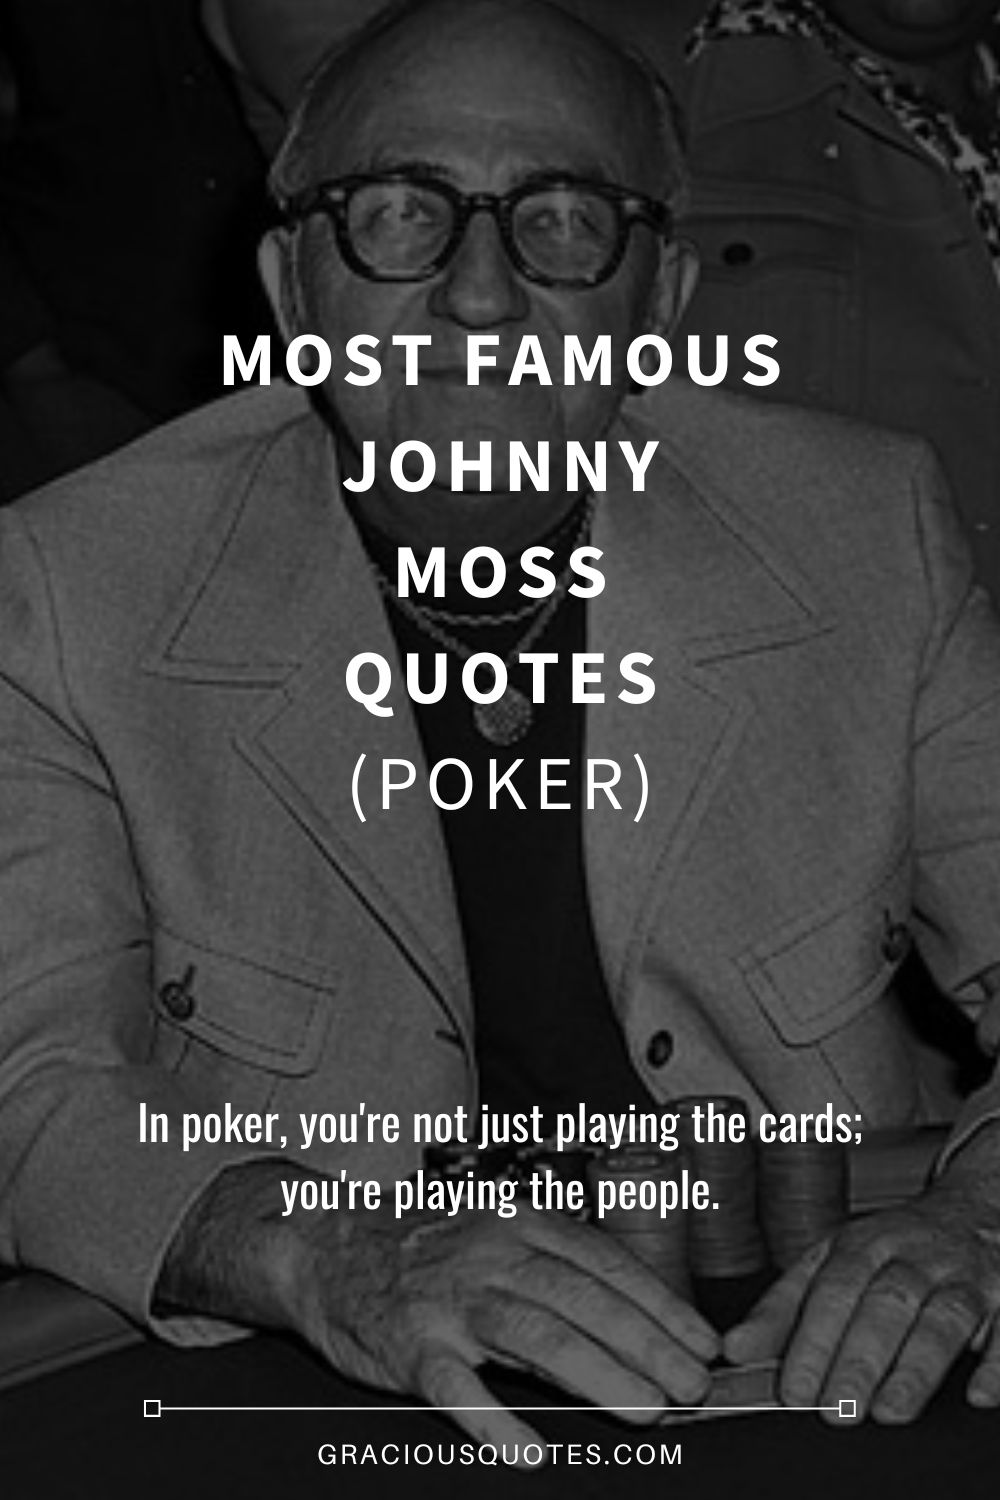 Most Famous Johnny Moss Quotes (POKER) - Gracious Quotes